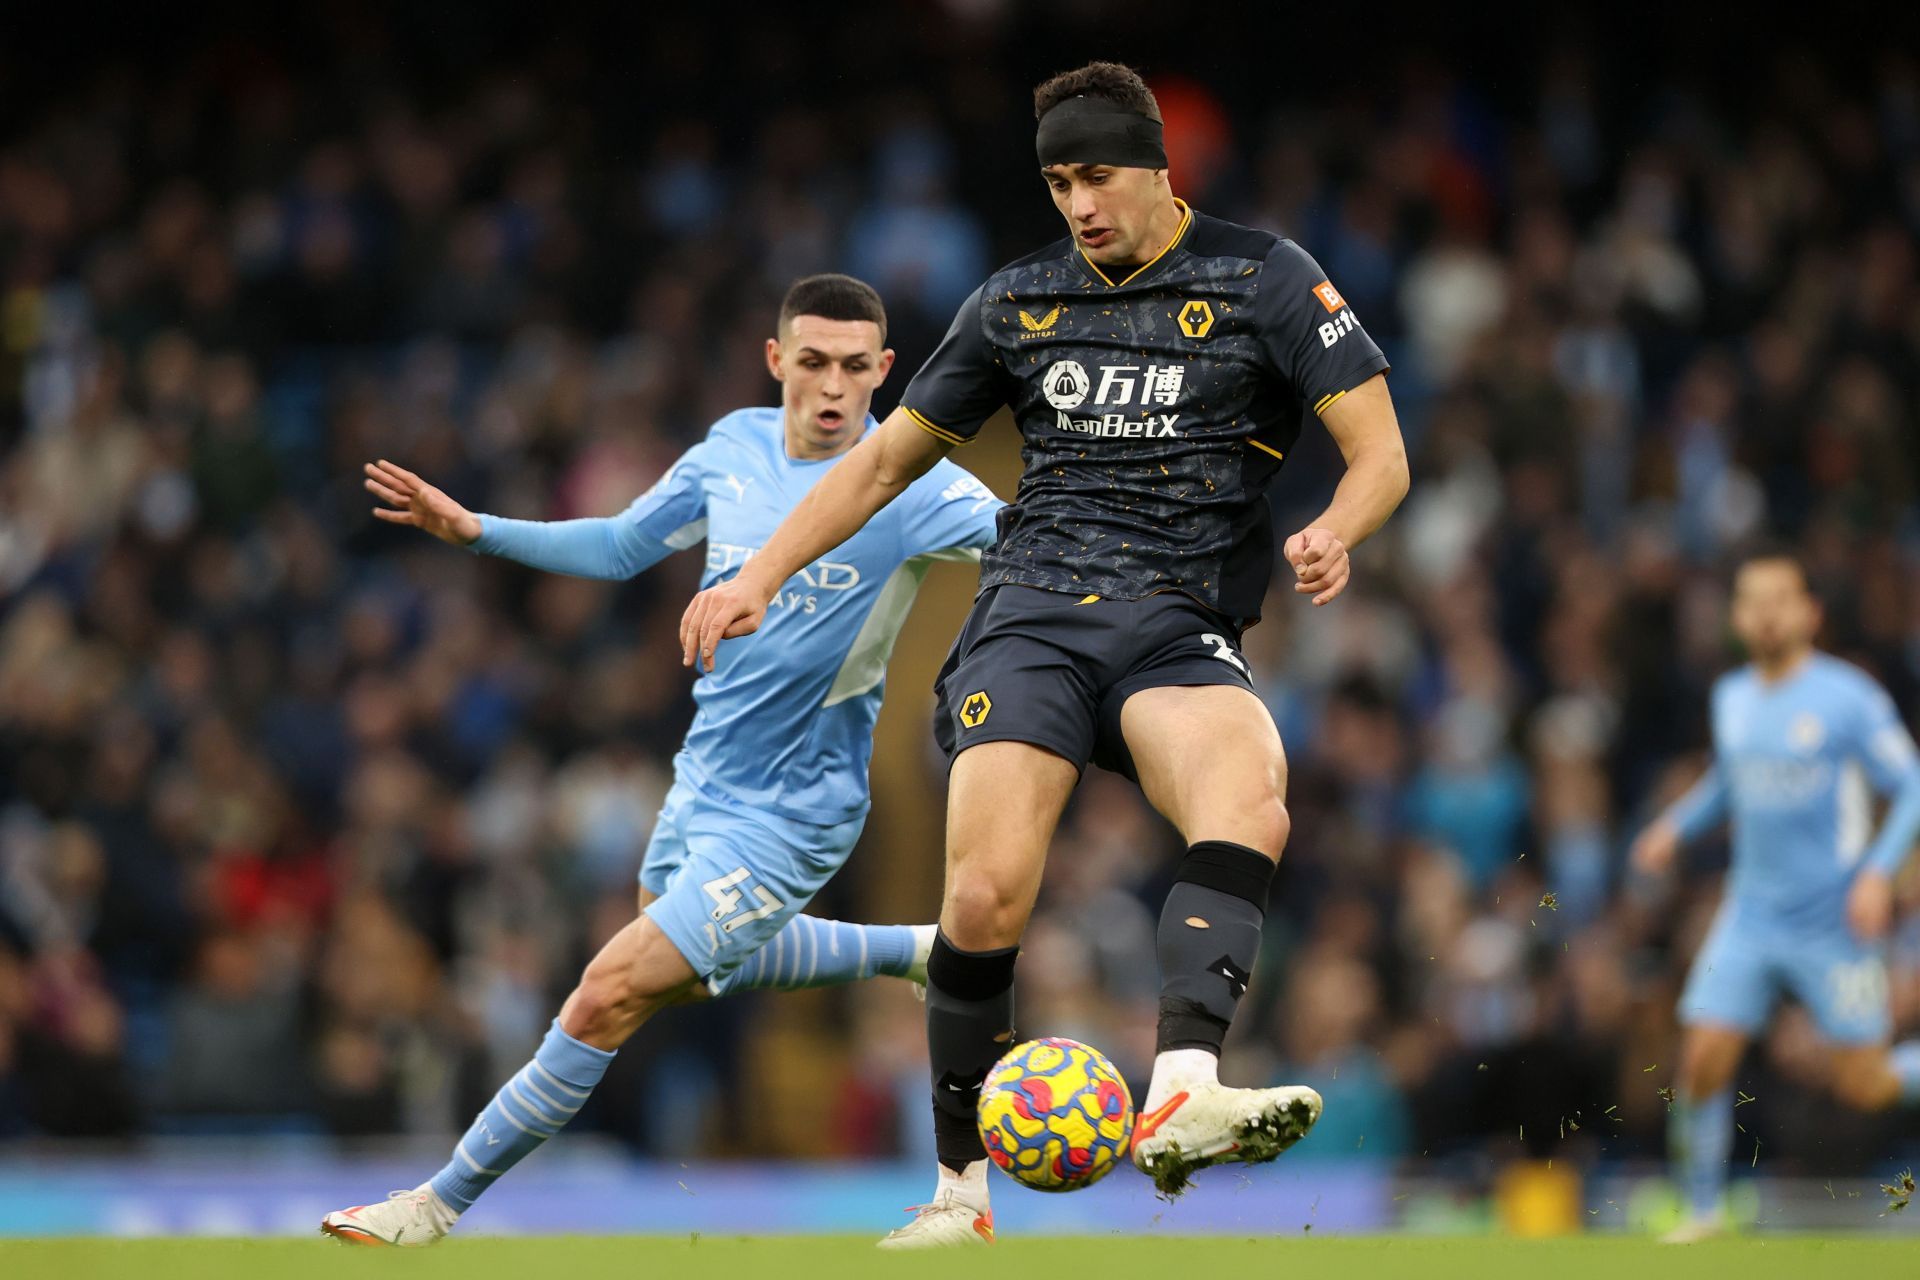 Manchester City take on Wolverhampton Wanderers this week